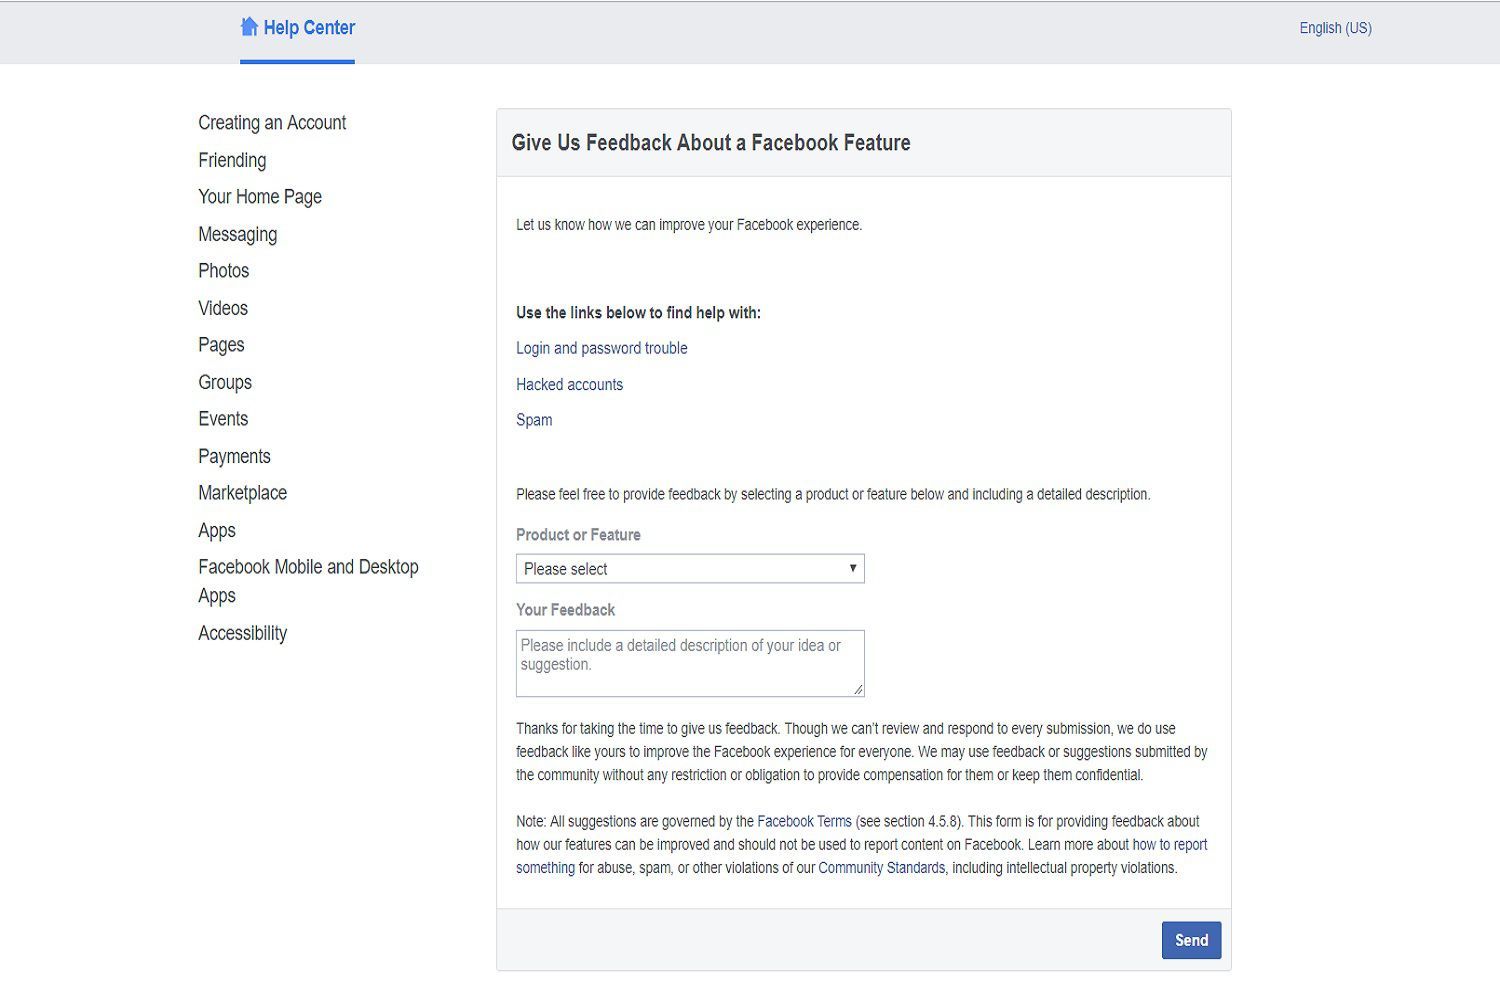 Скриншот Facebook's feedback form customers can fill out to give their opinions and suggestions about Facebook features.